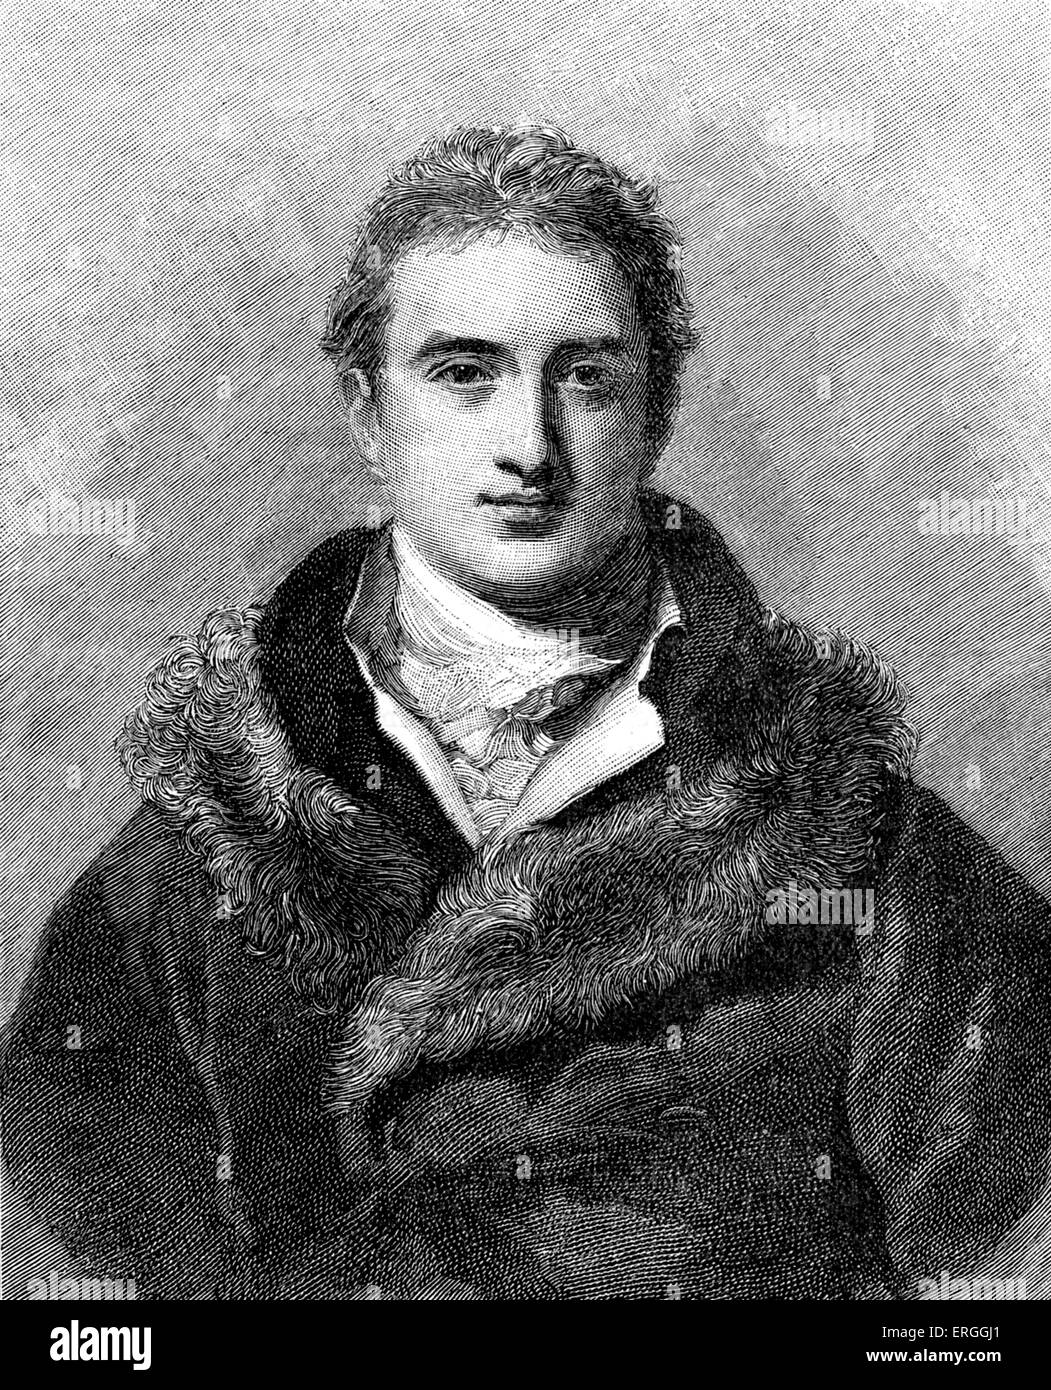 Robert Stewart, Viscount Castlereagh. Irish and British statesman, central to mangement of coalition that defeated Napoleon and Stock Photo